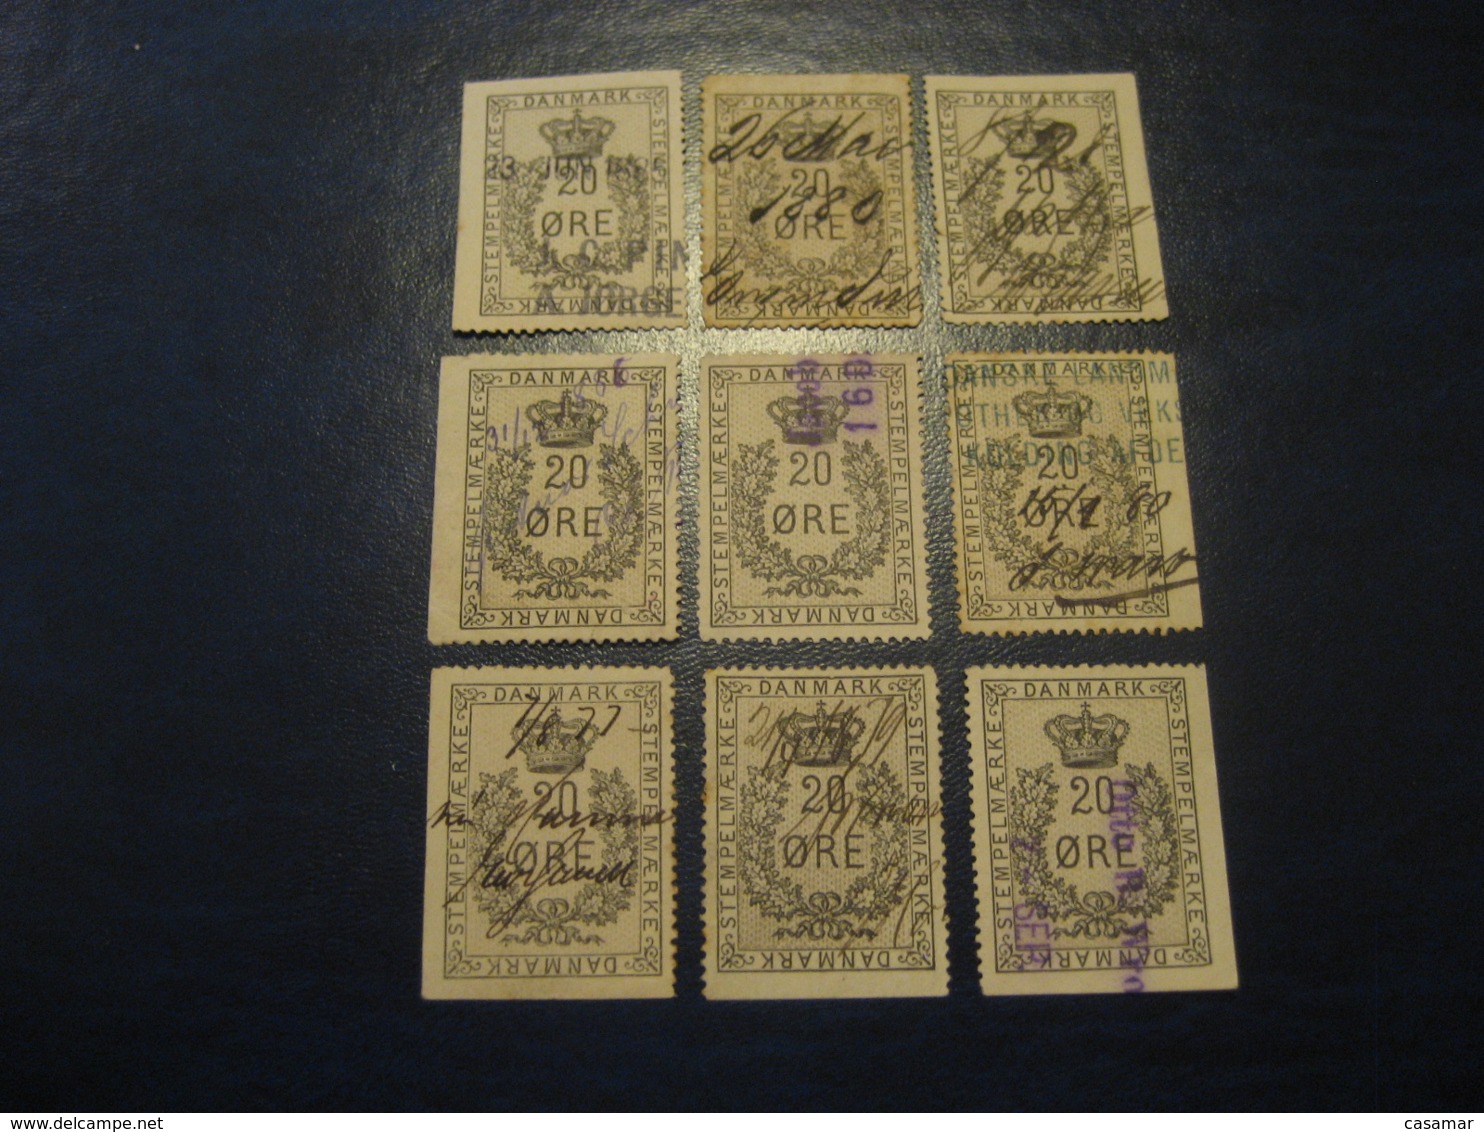 STEMPELMAERKE 20 Ore 9 Different Perforated / Imperforated Sides Fiscal Tax Revenue Postage Due Official DENMARK - Fiscali